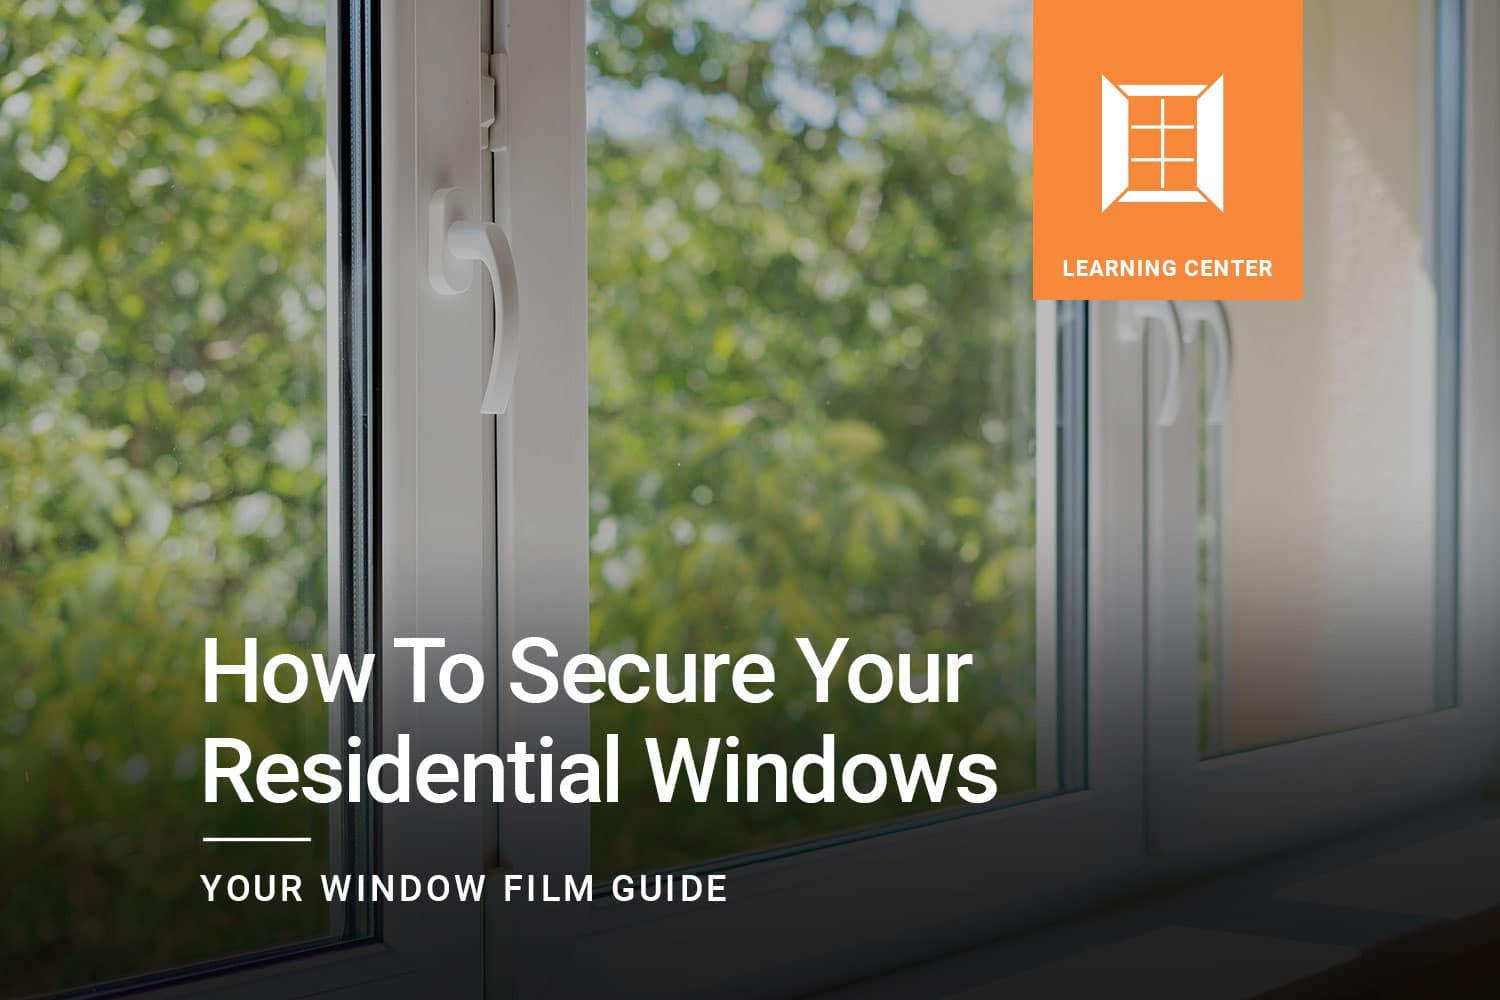 How can you make your home windows more secure? The San Francisco Bay Area's Window Film and Security Screen expert ClimatePro give you 5 tips.